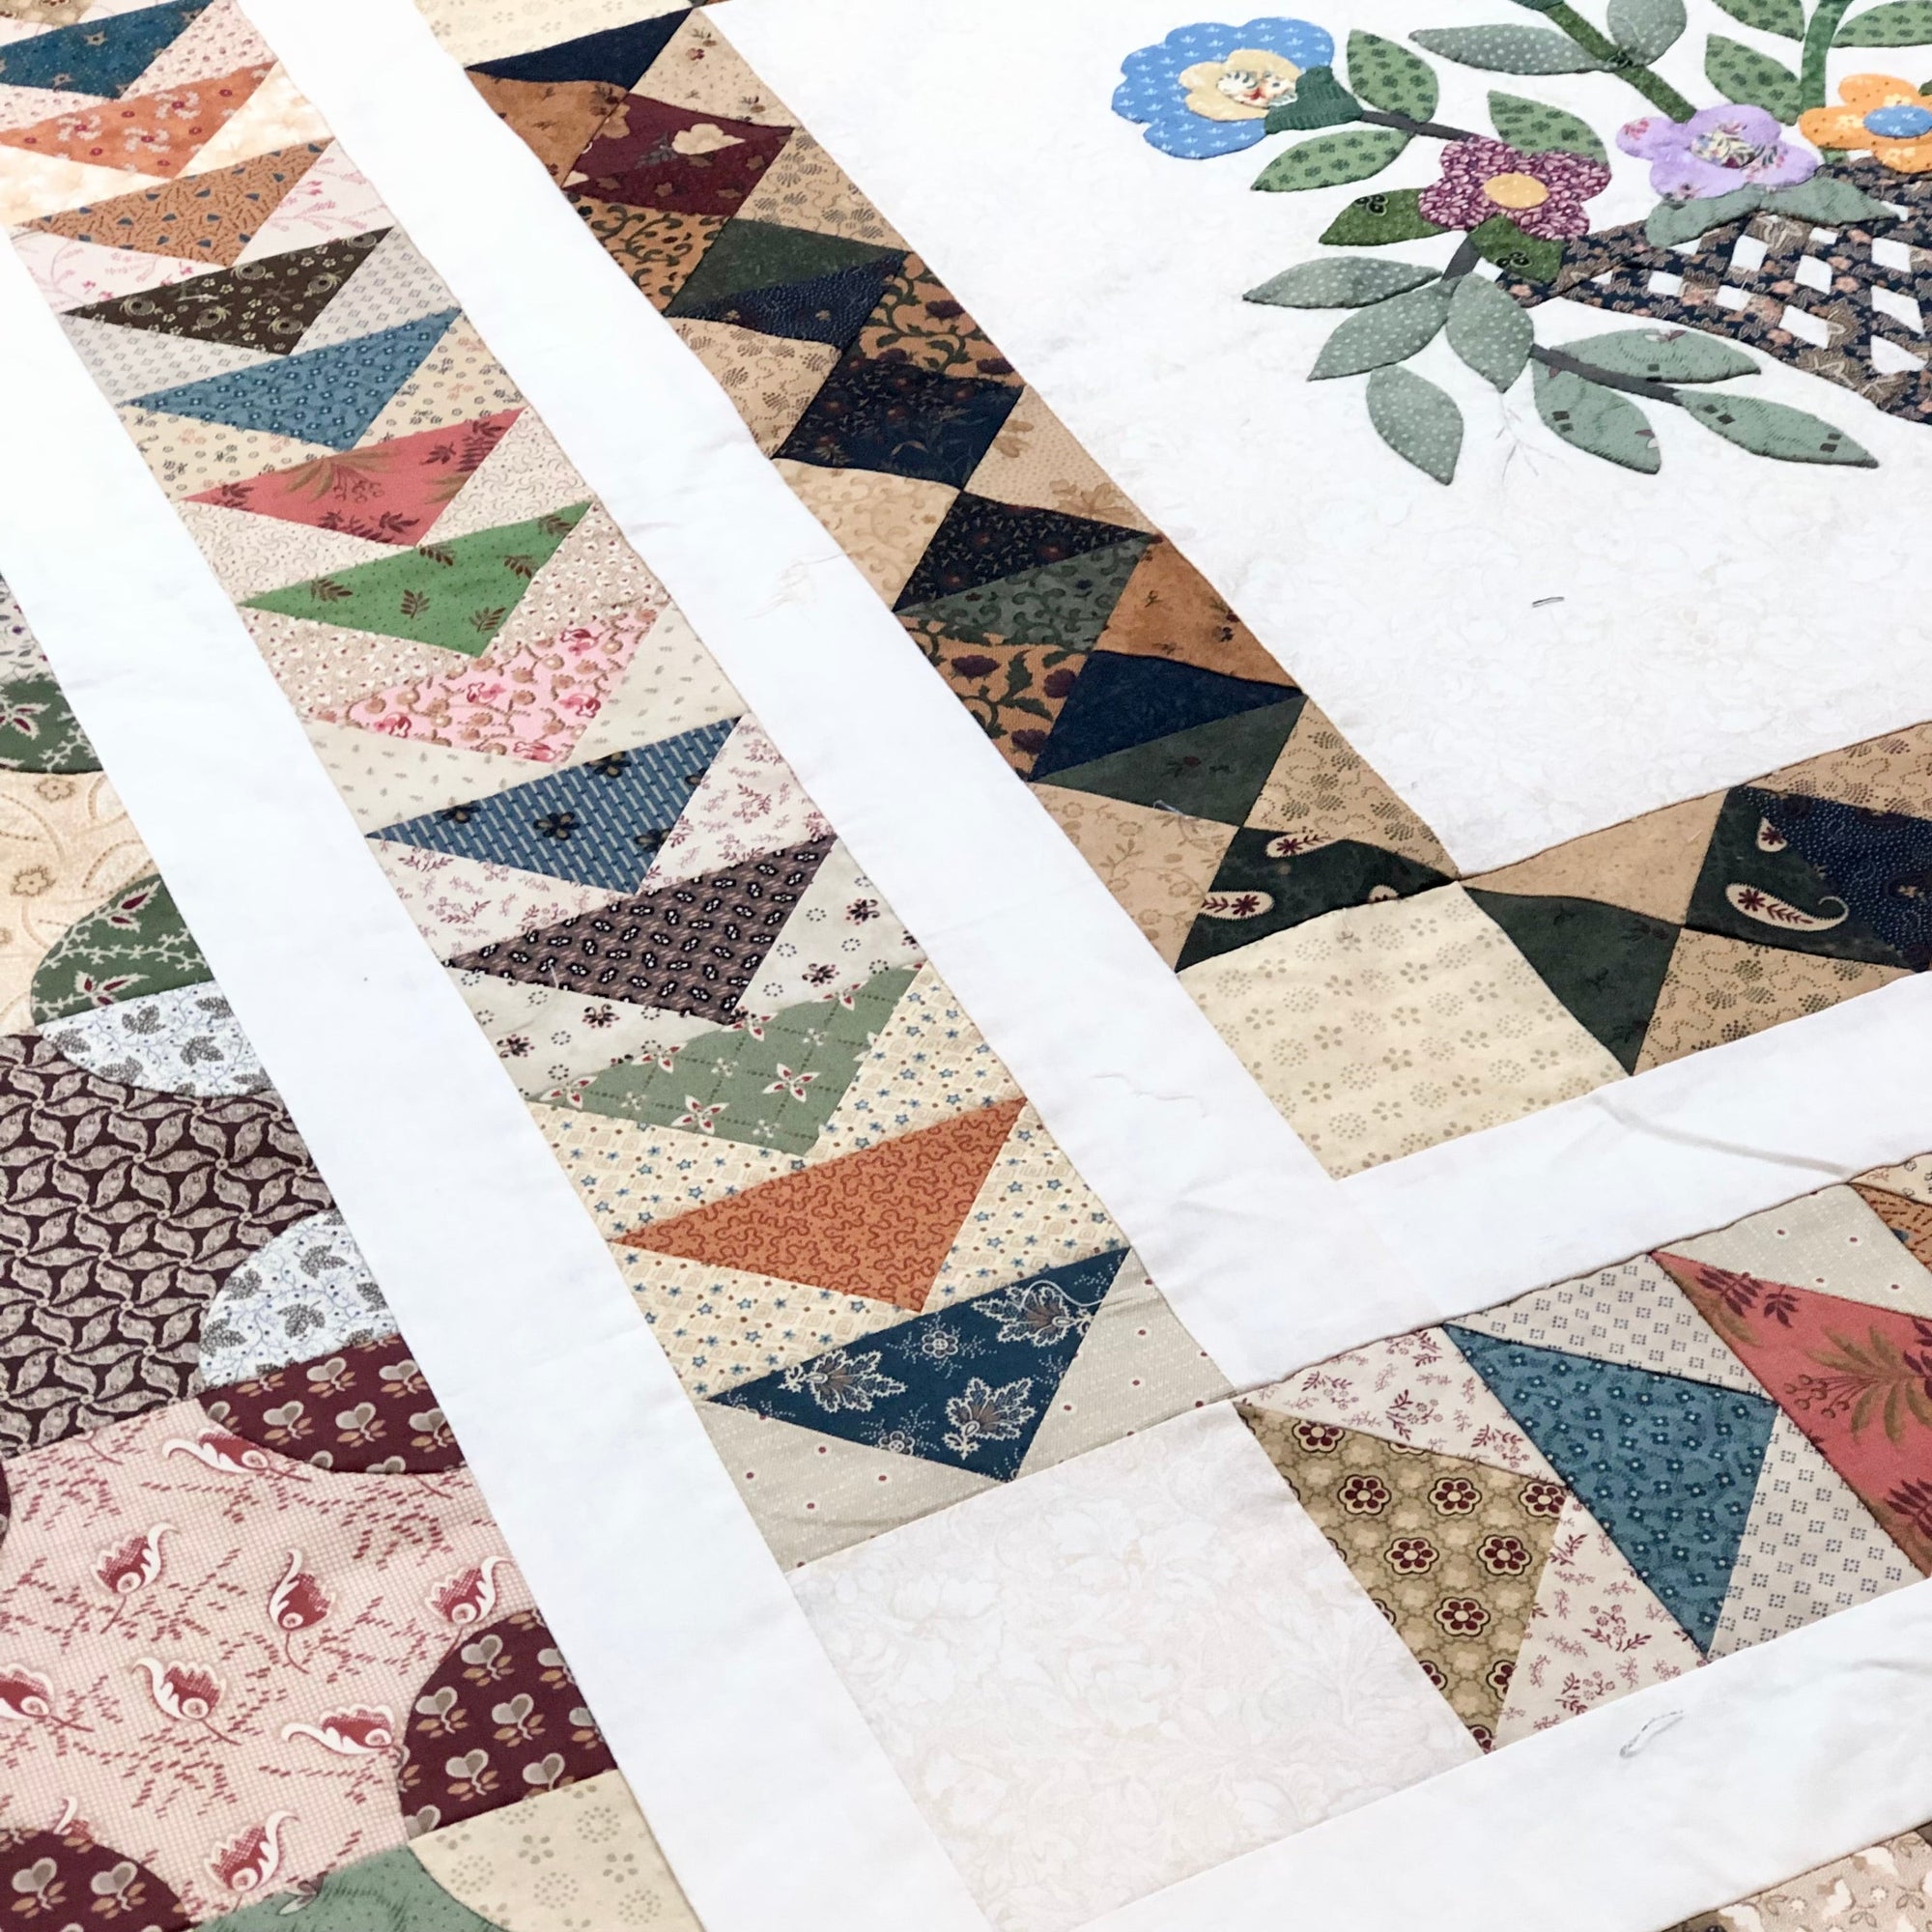 Quilting Drop In - Saturday June 22nd 10am to 1pm $19 per hour